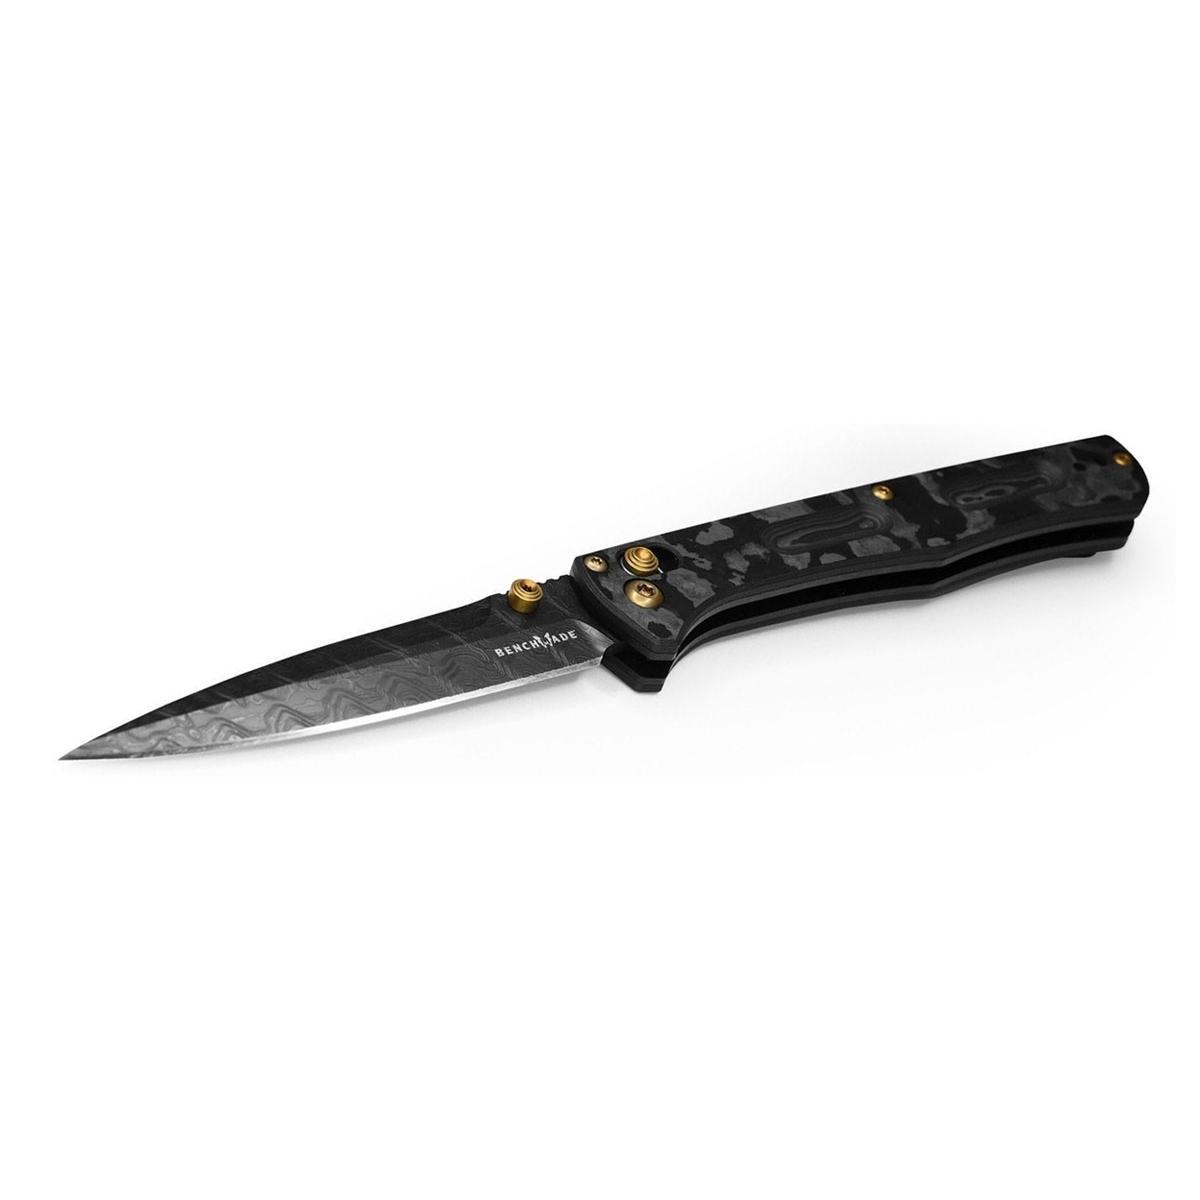 Benchmade FACT 417BK-231 Limited Edition